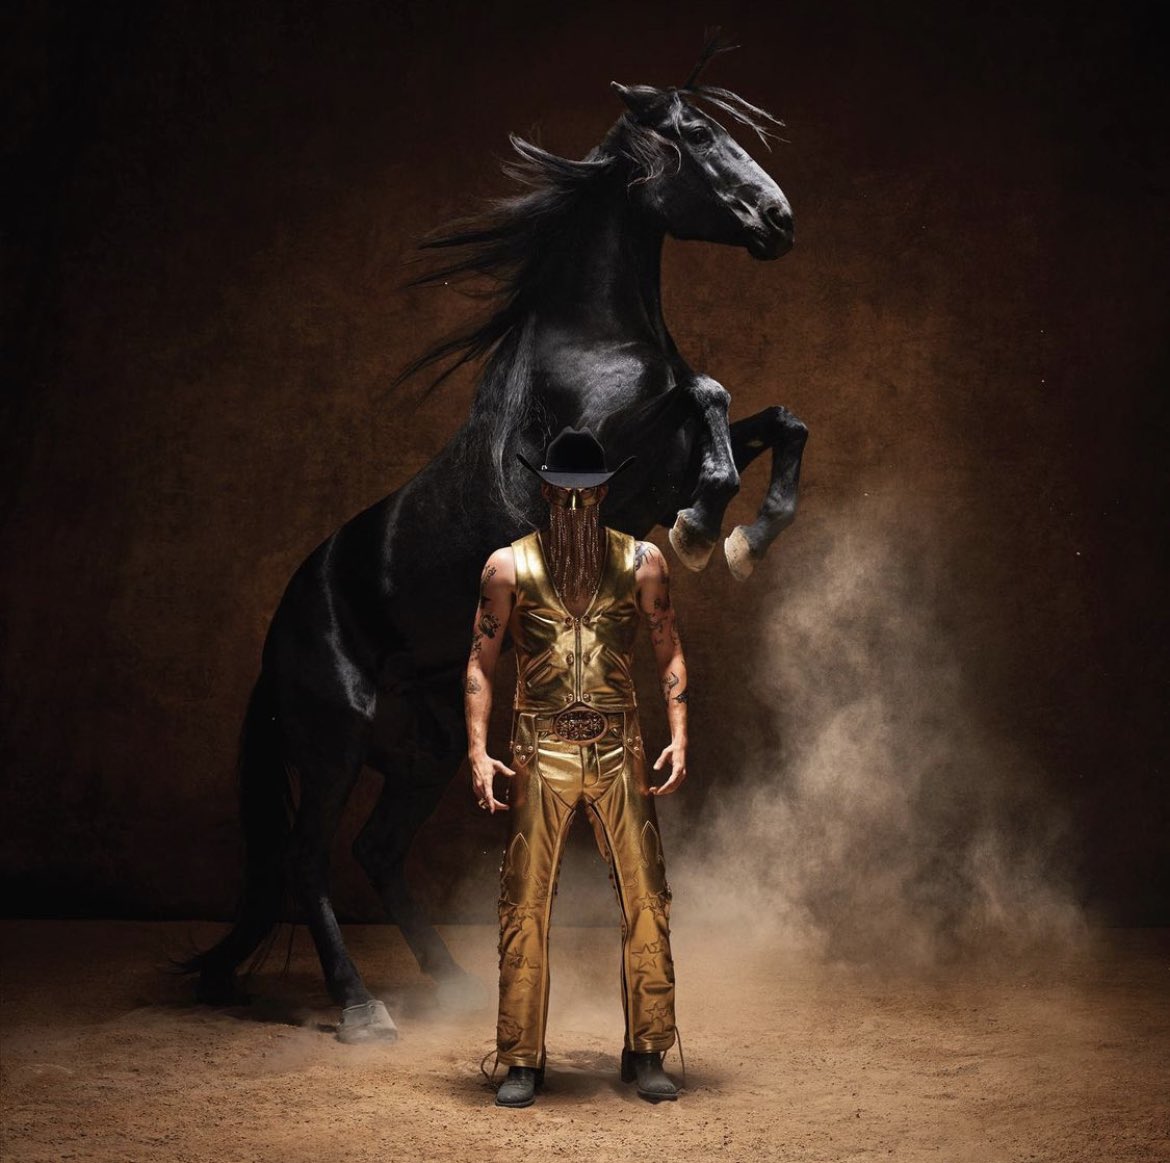 Orville Peck — The Curse of the Blackened Eye cover artwork